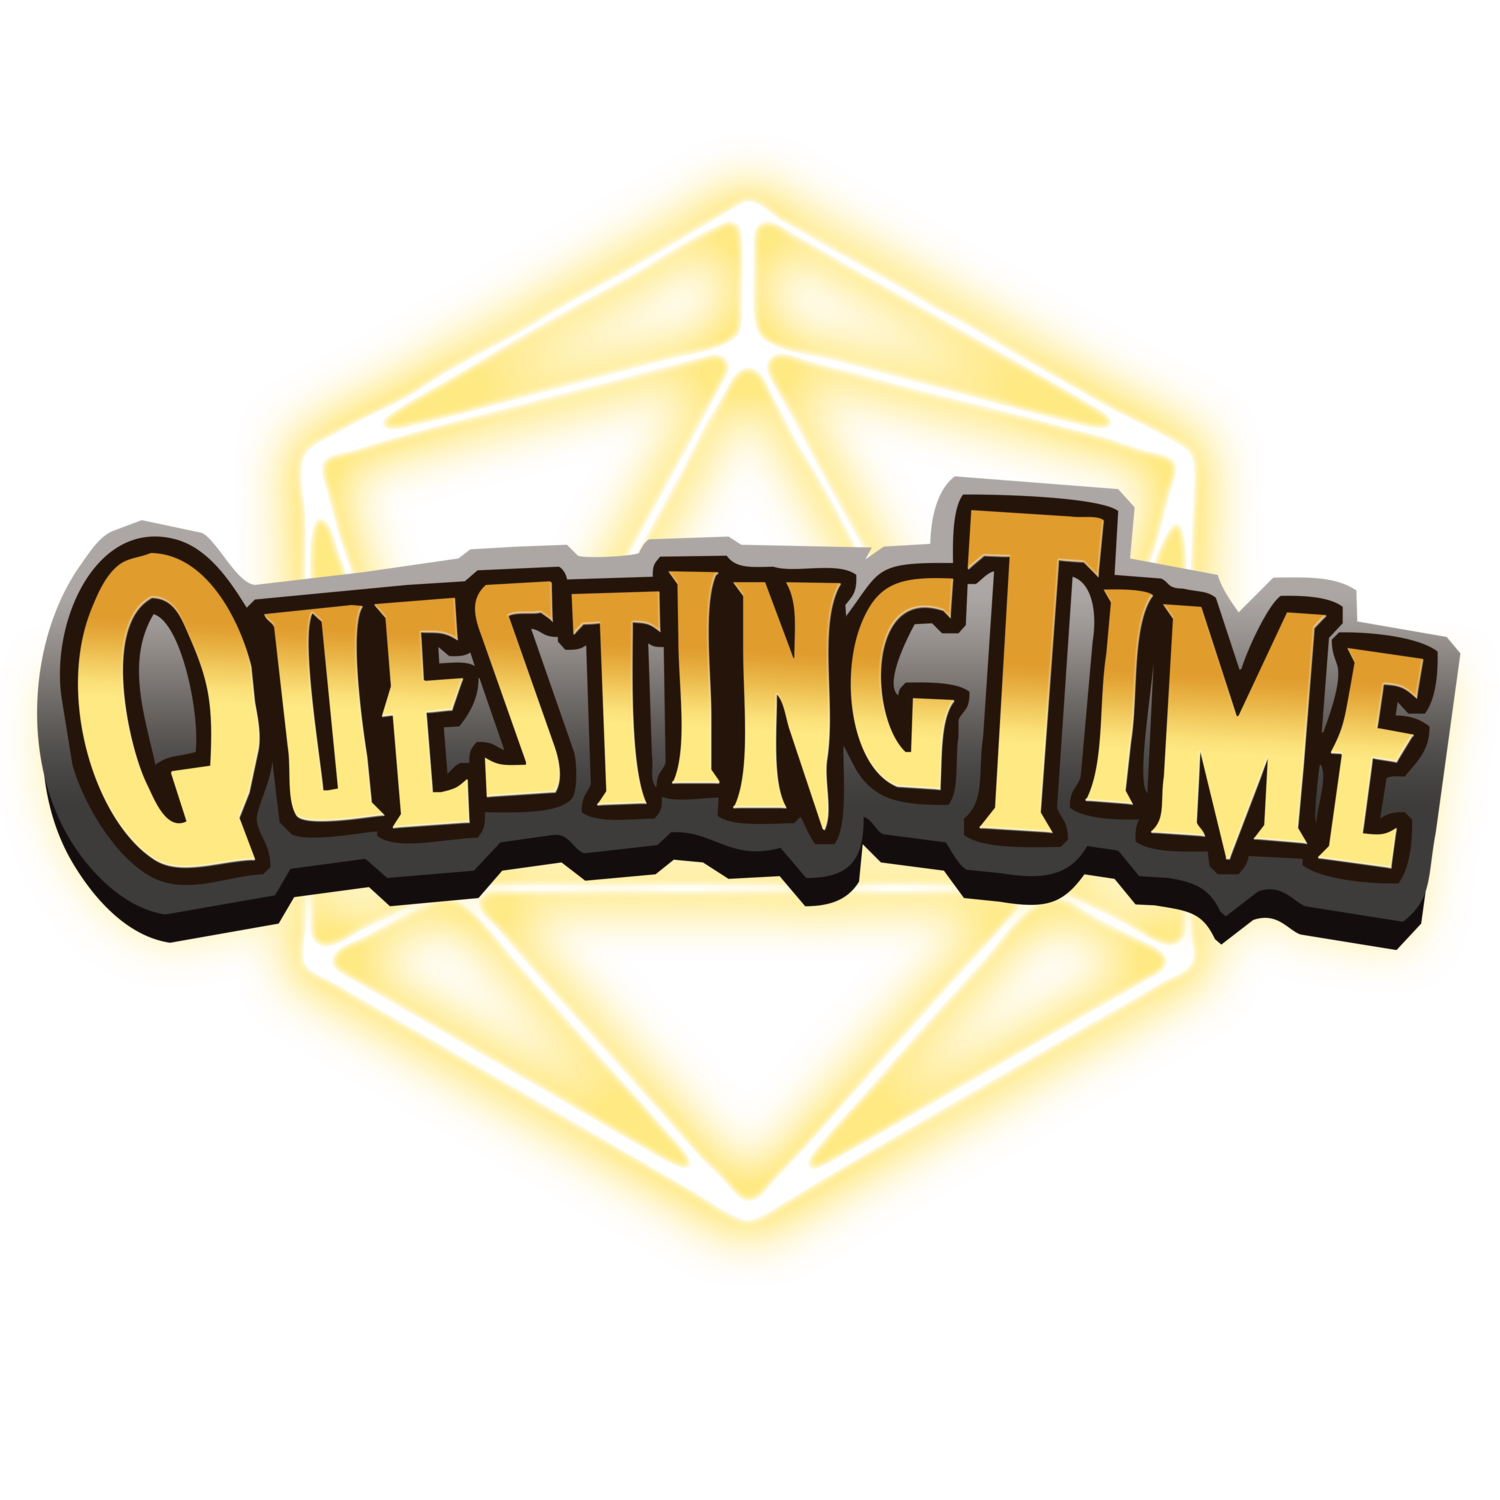 Questing time